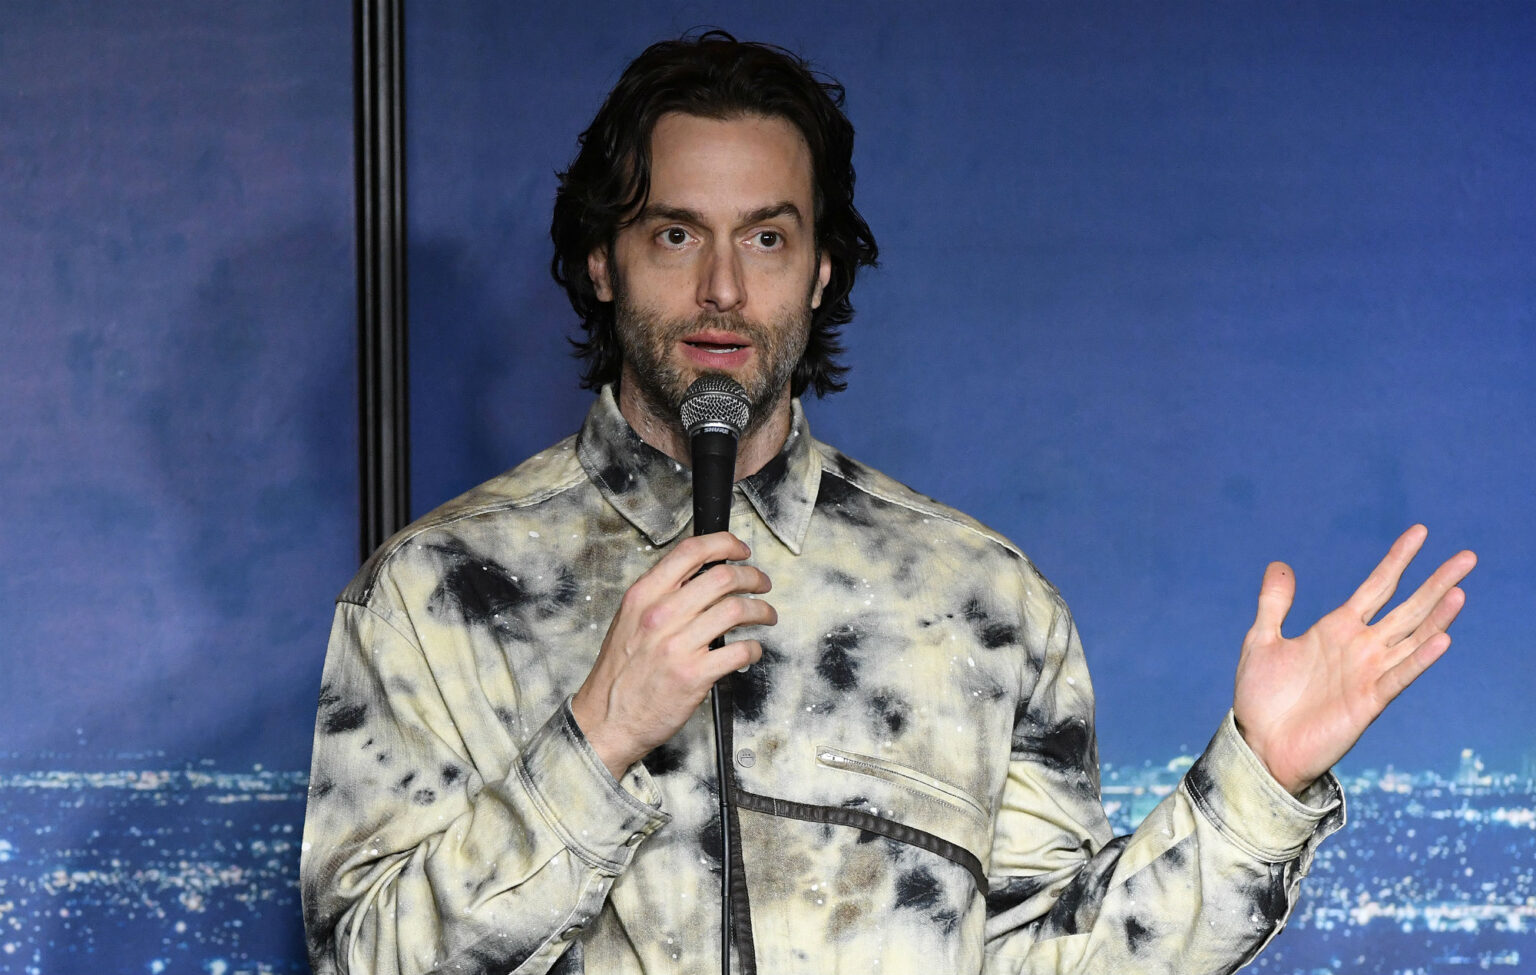 "You" star Chris D'Elia posts an apology video regarding allegations of inappropriate sexual behavior. Will cancel culture get the best of the comedian?